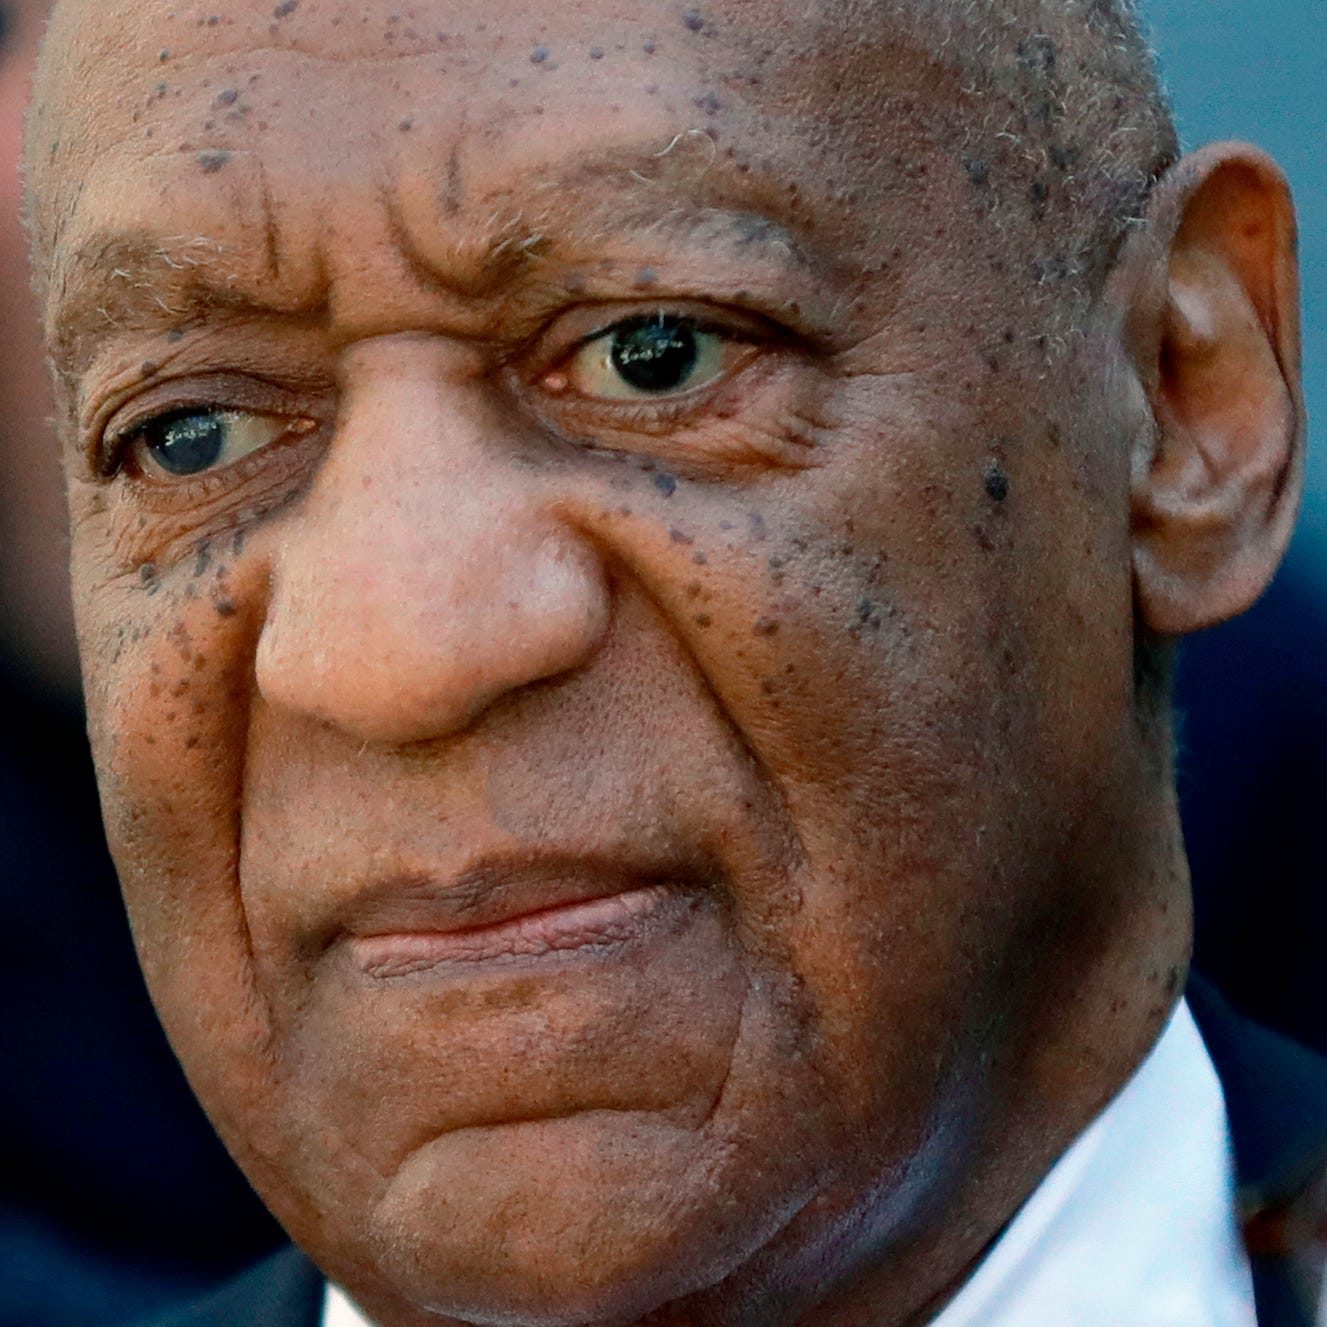 Bill Cosby on April 26, 2018 after he was found guilty in his sexual assault retrial, in Norristown, Pa.